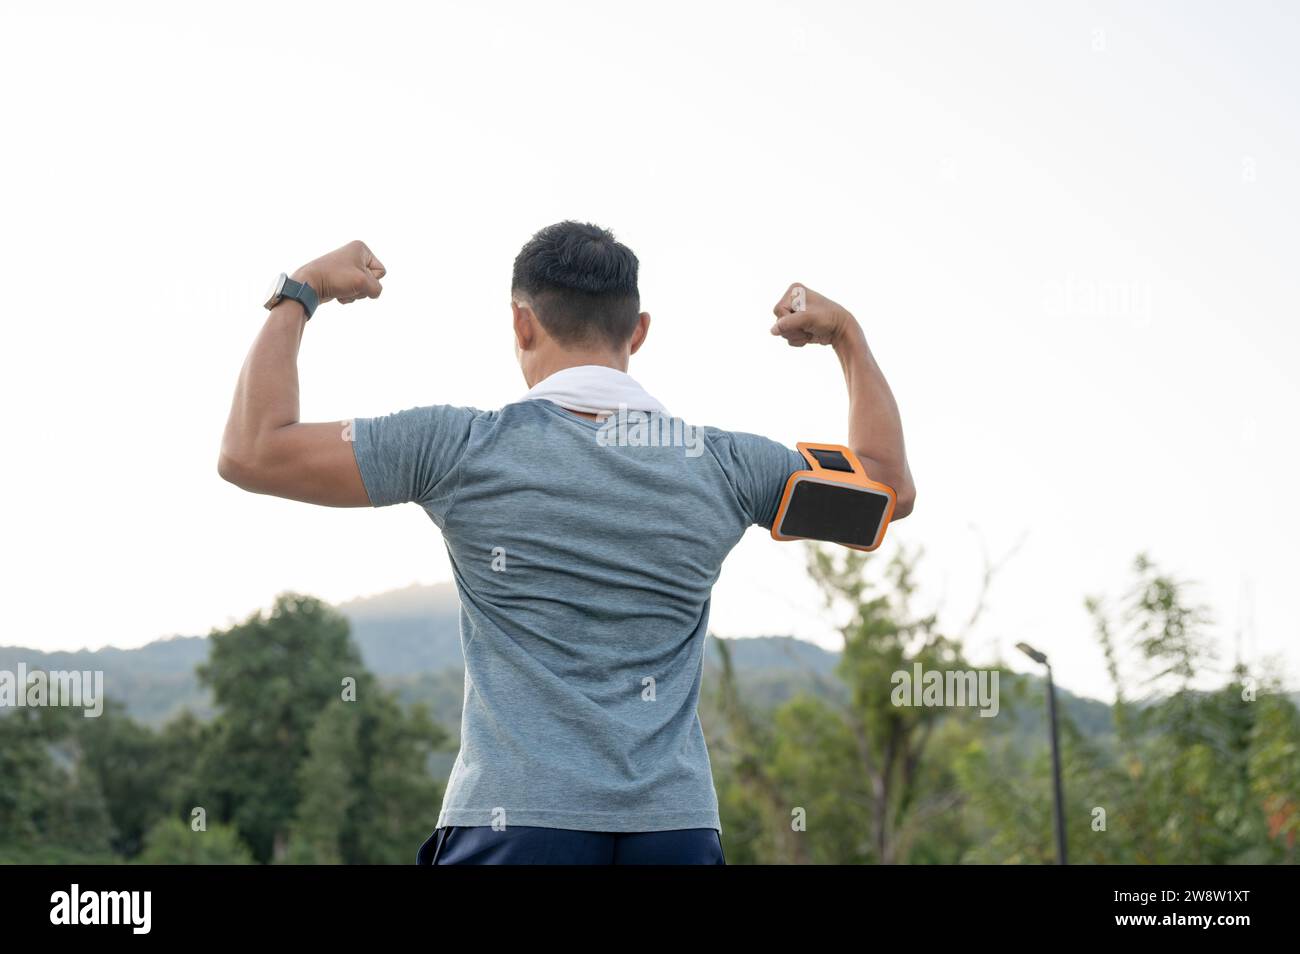 A strong Asian man in sportswear is showing his strong arm muscle, running exercise outdoors. back view Stock Photo